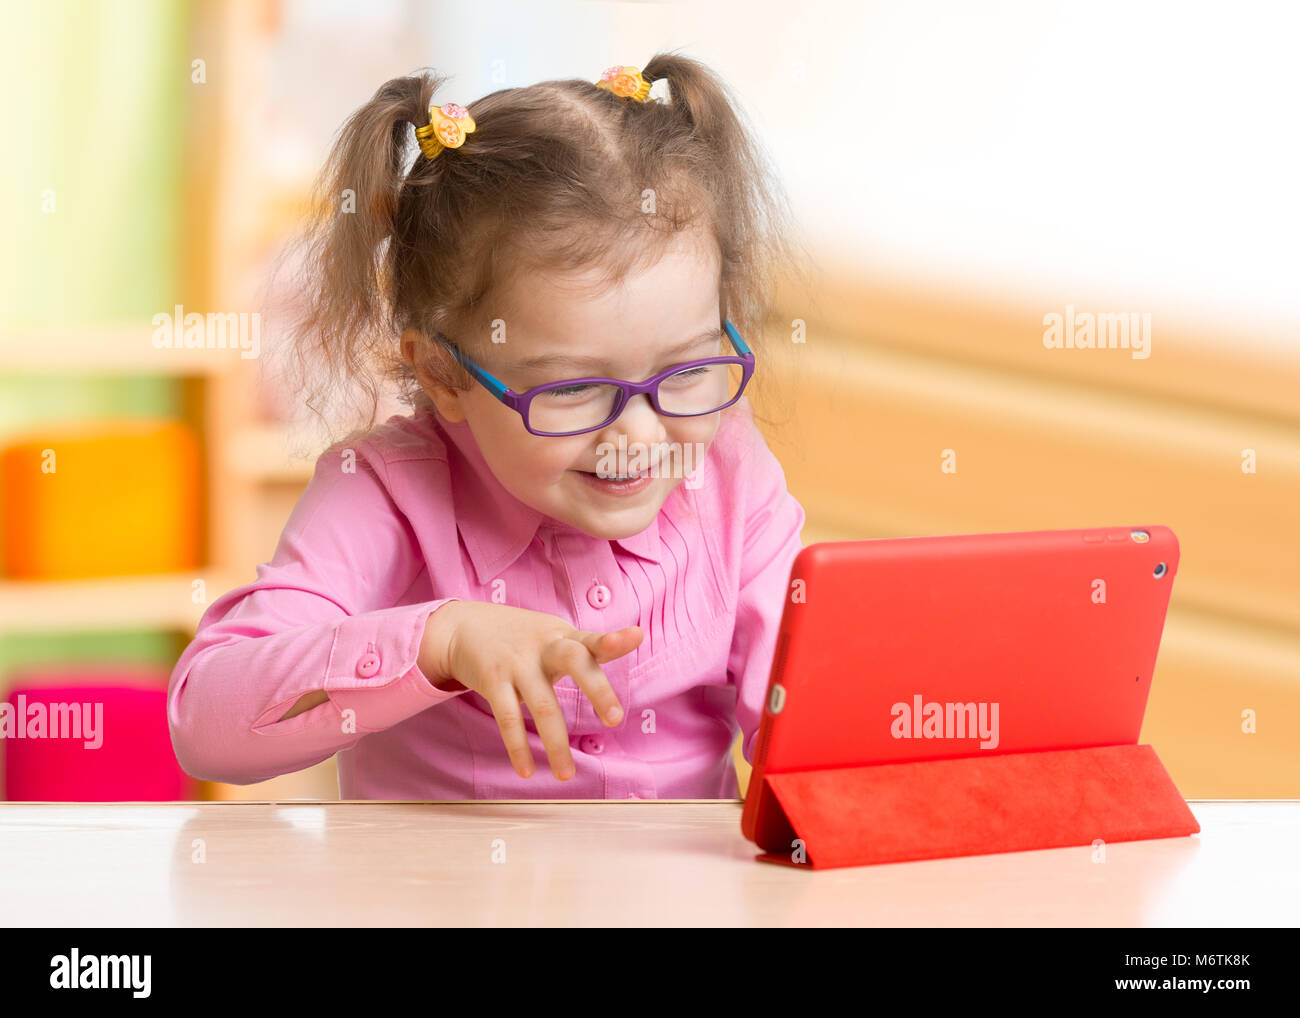 Smart kid in spectacles using tablet PC or e-book sitting at table in her room Stock Photo